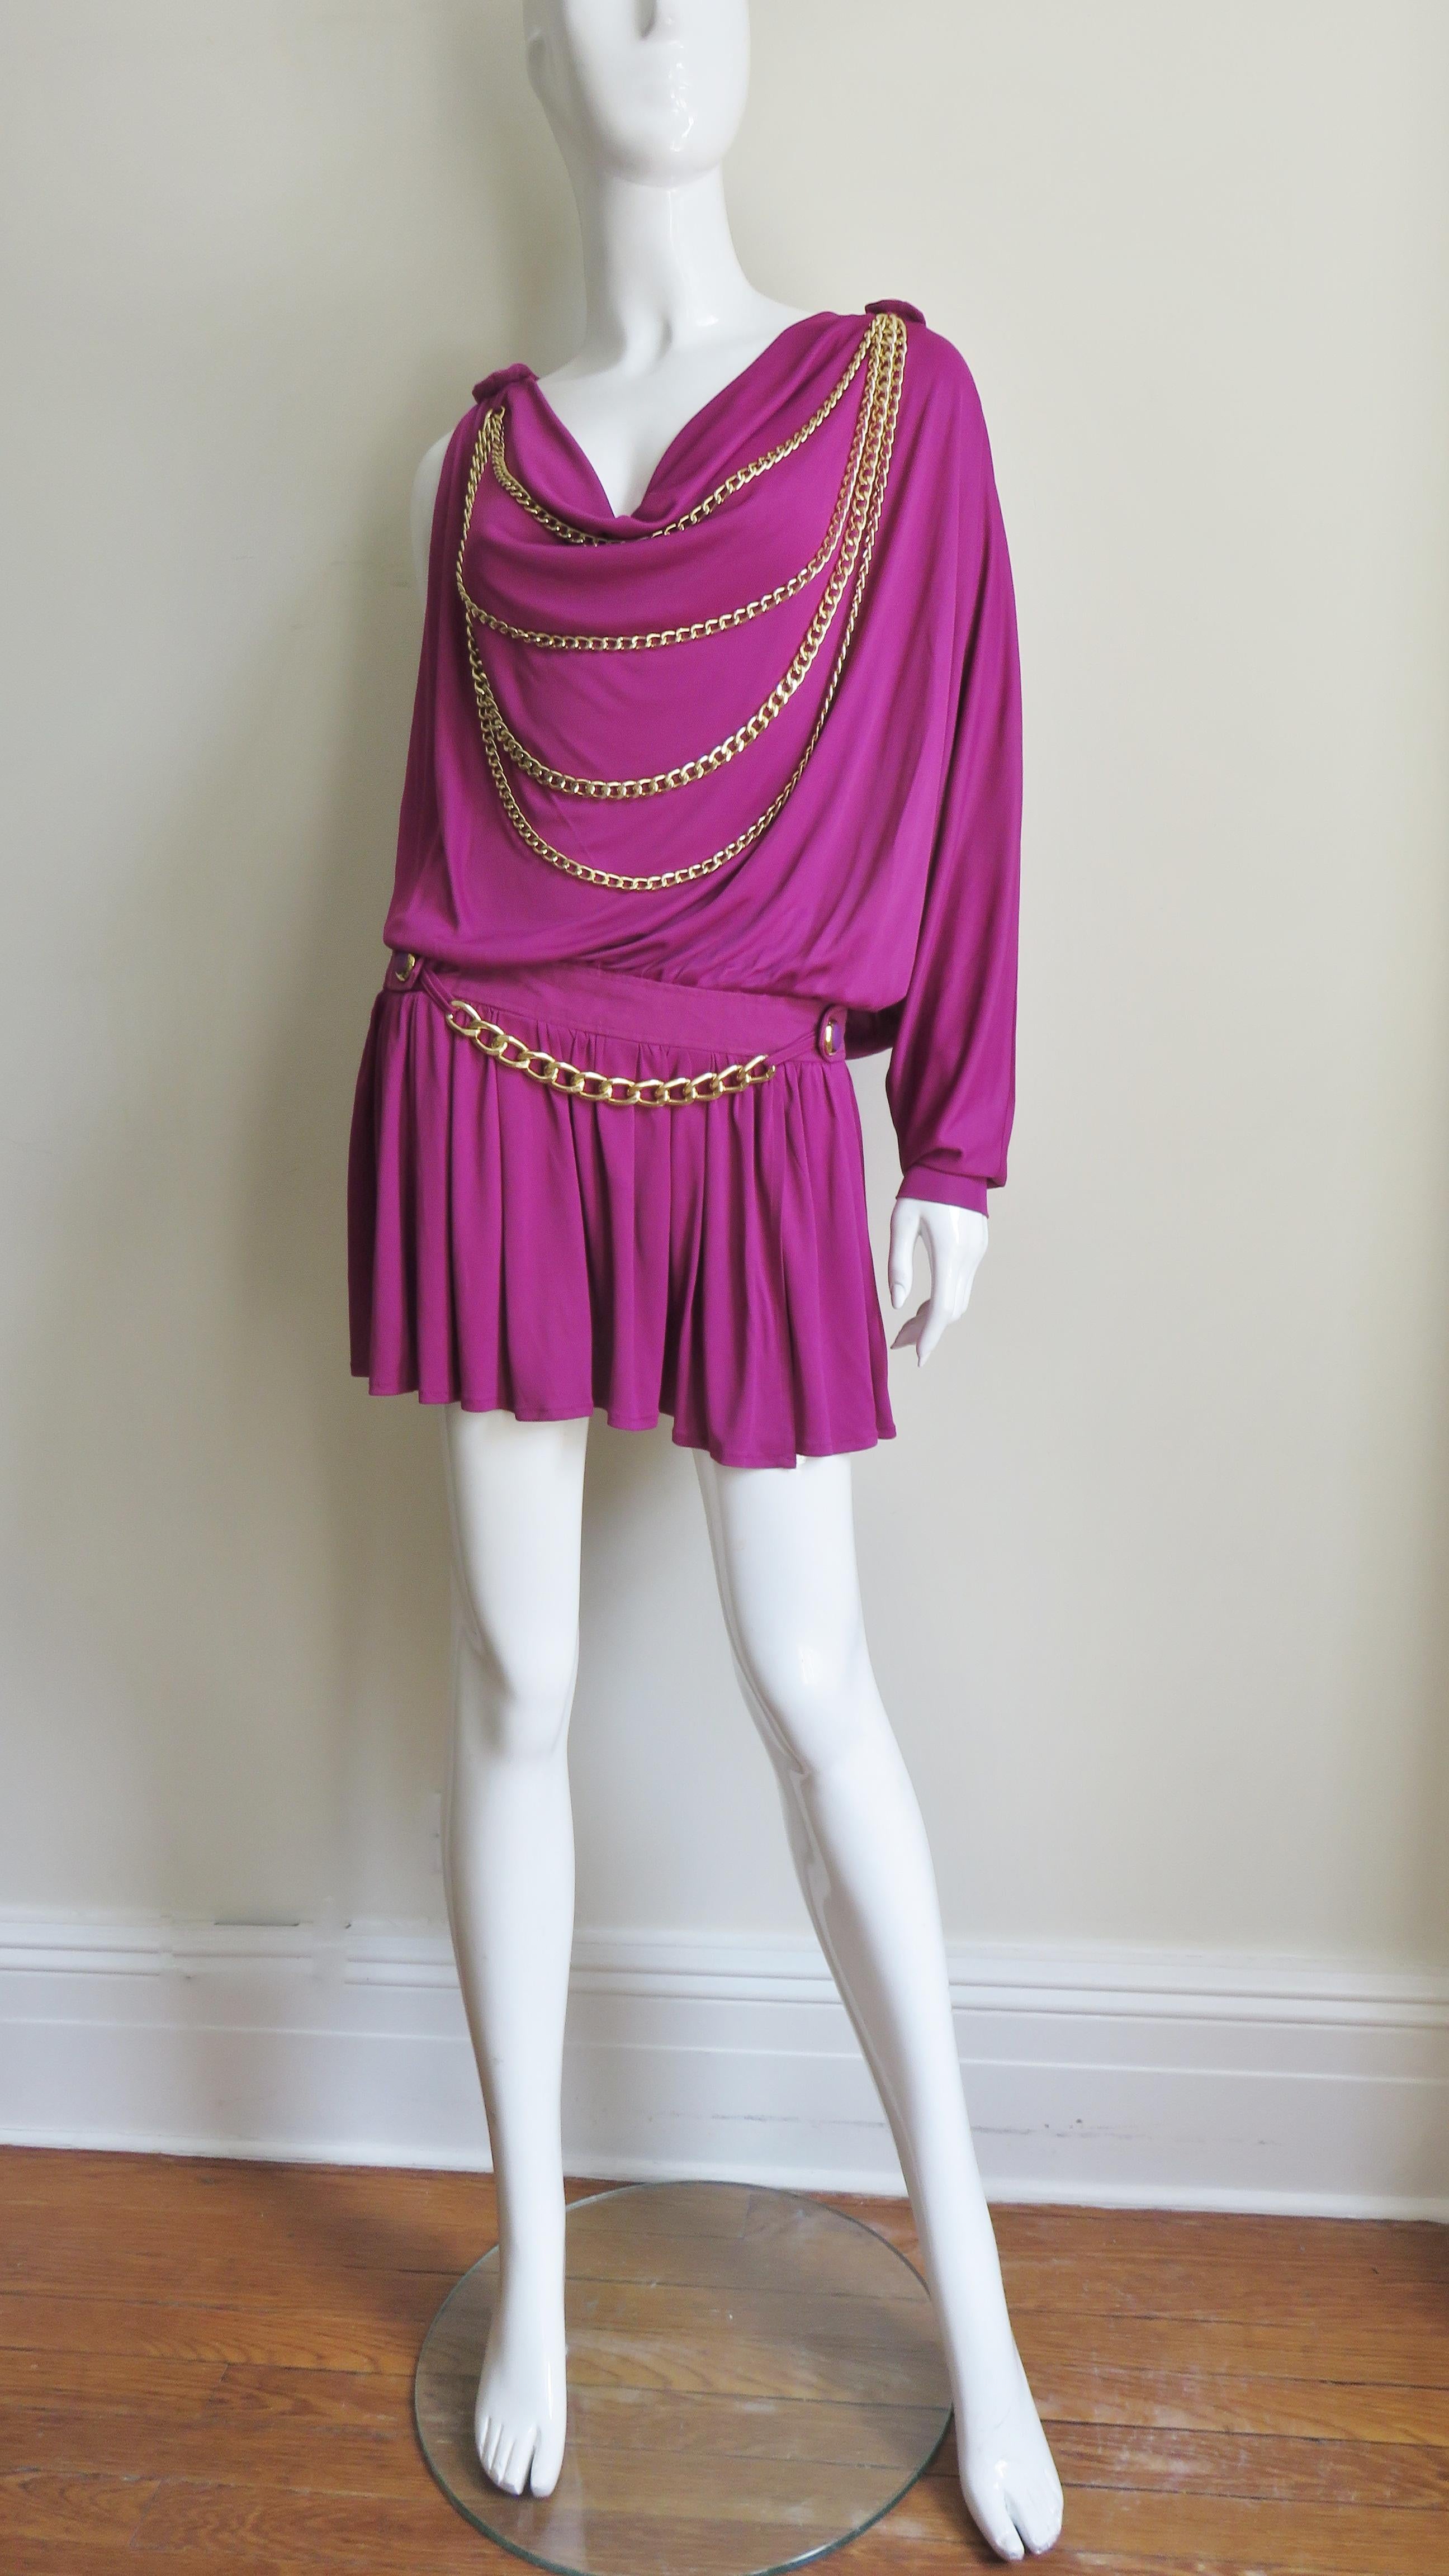 Dolce & Gabbana New One Sleeve Dress with Chains In New Condition For Sale In Water Mill, NY